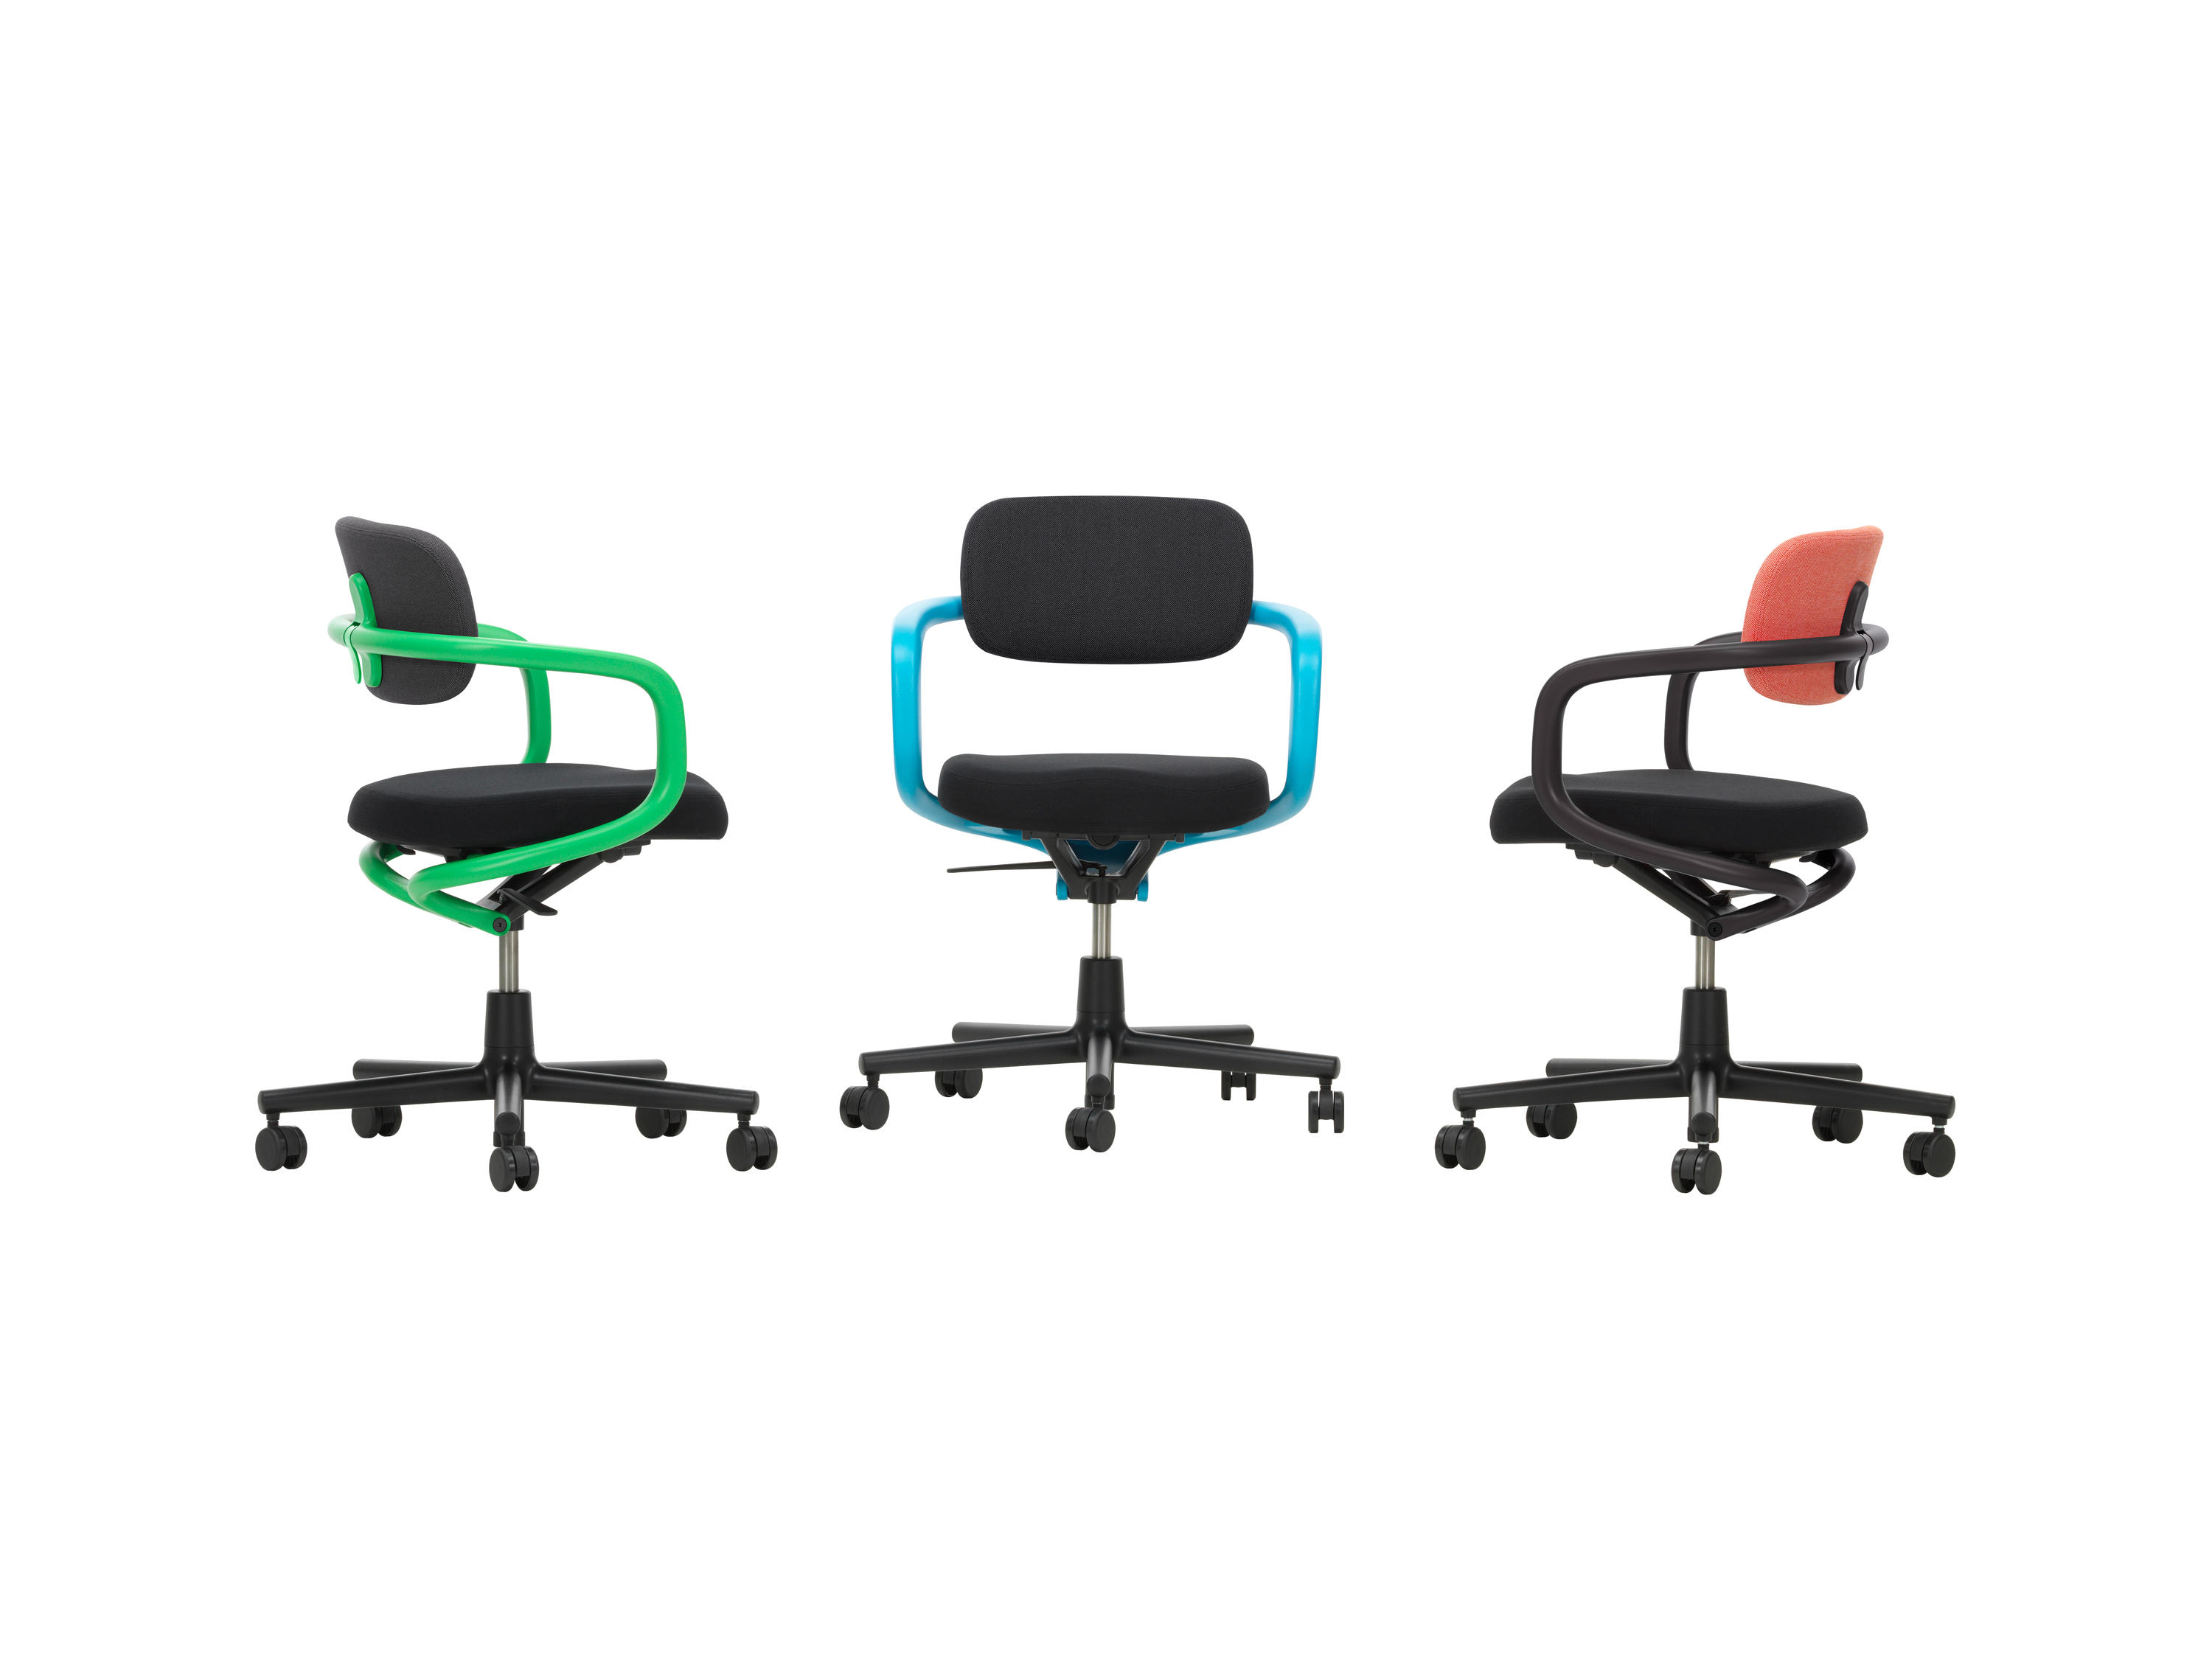 ALLSTAR - Office chairs from Vitra